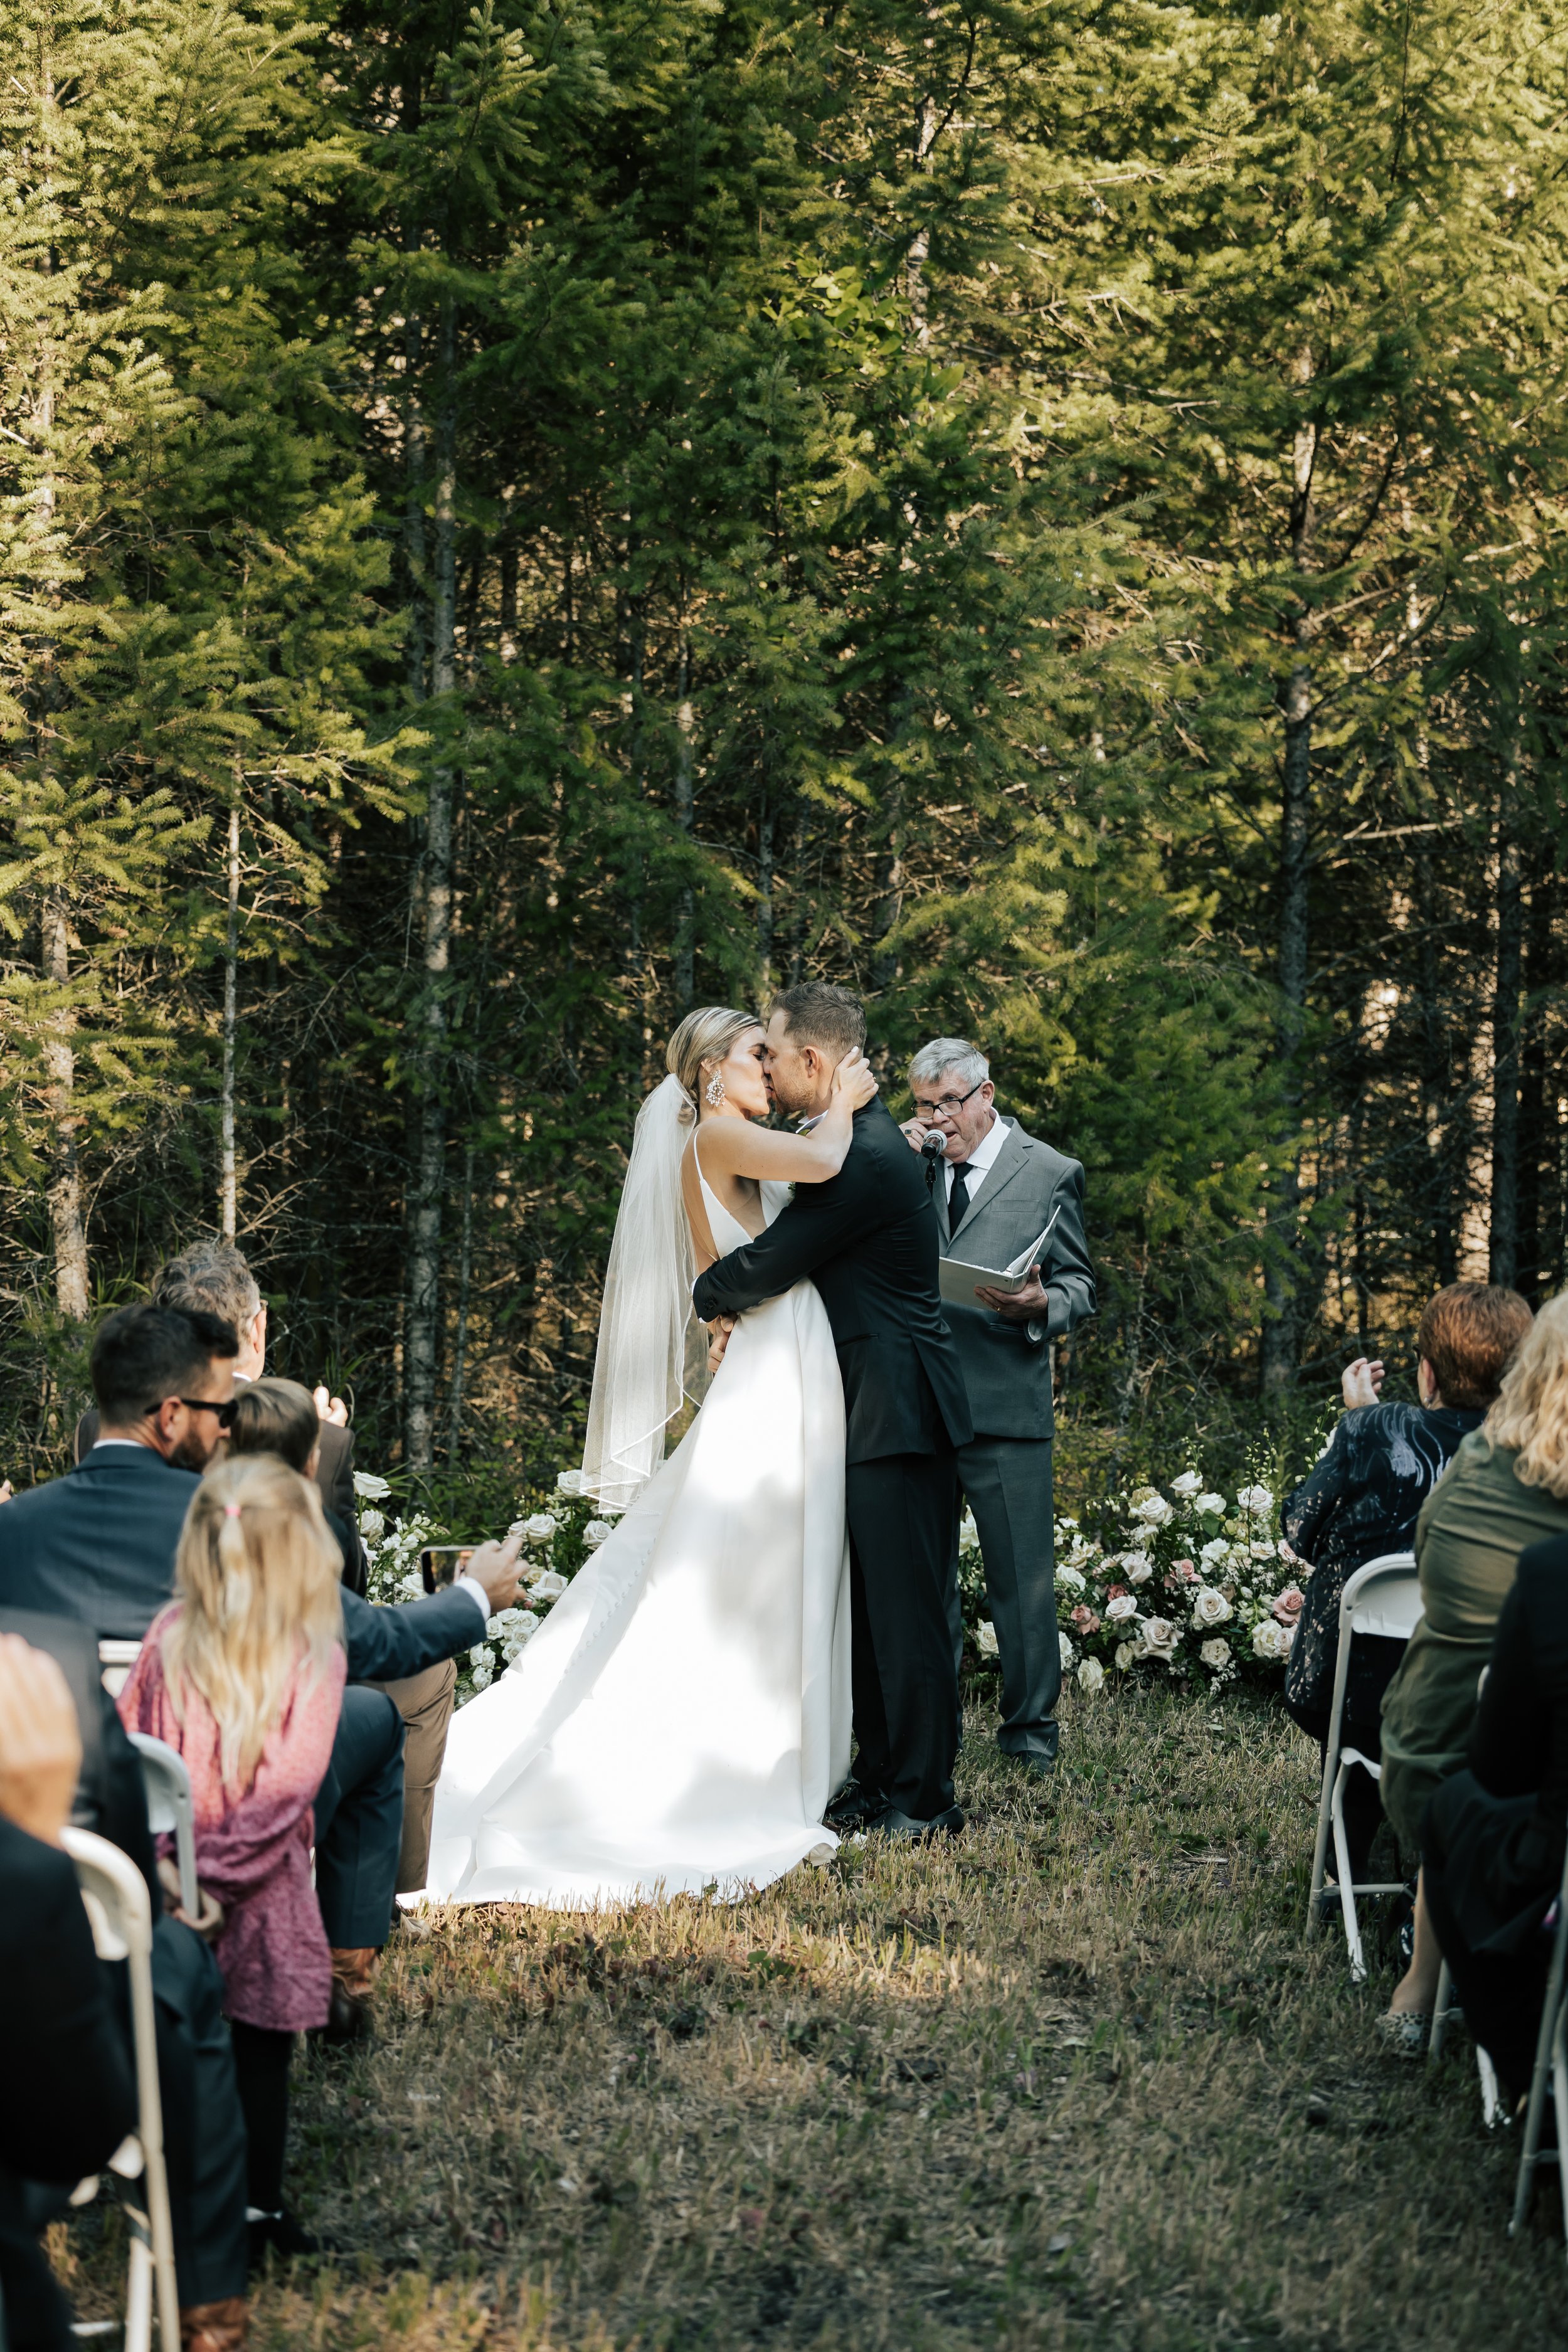  Bride and groom smile at each other during their wedding ceremony in the forest in Whitefish, Montana. Bride and groom kiss after they become husband and wife. Wedding inspo. Bride is wearing gorgeous large white earrings with a strappy wedding dres